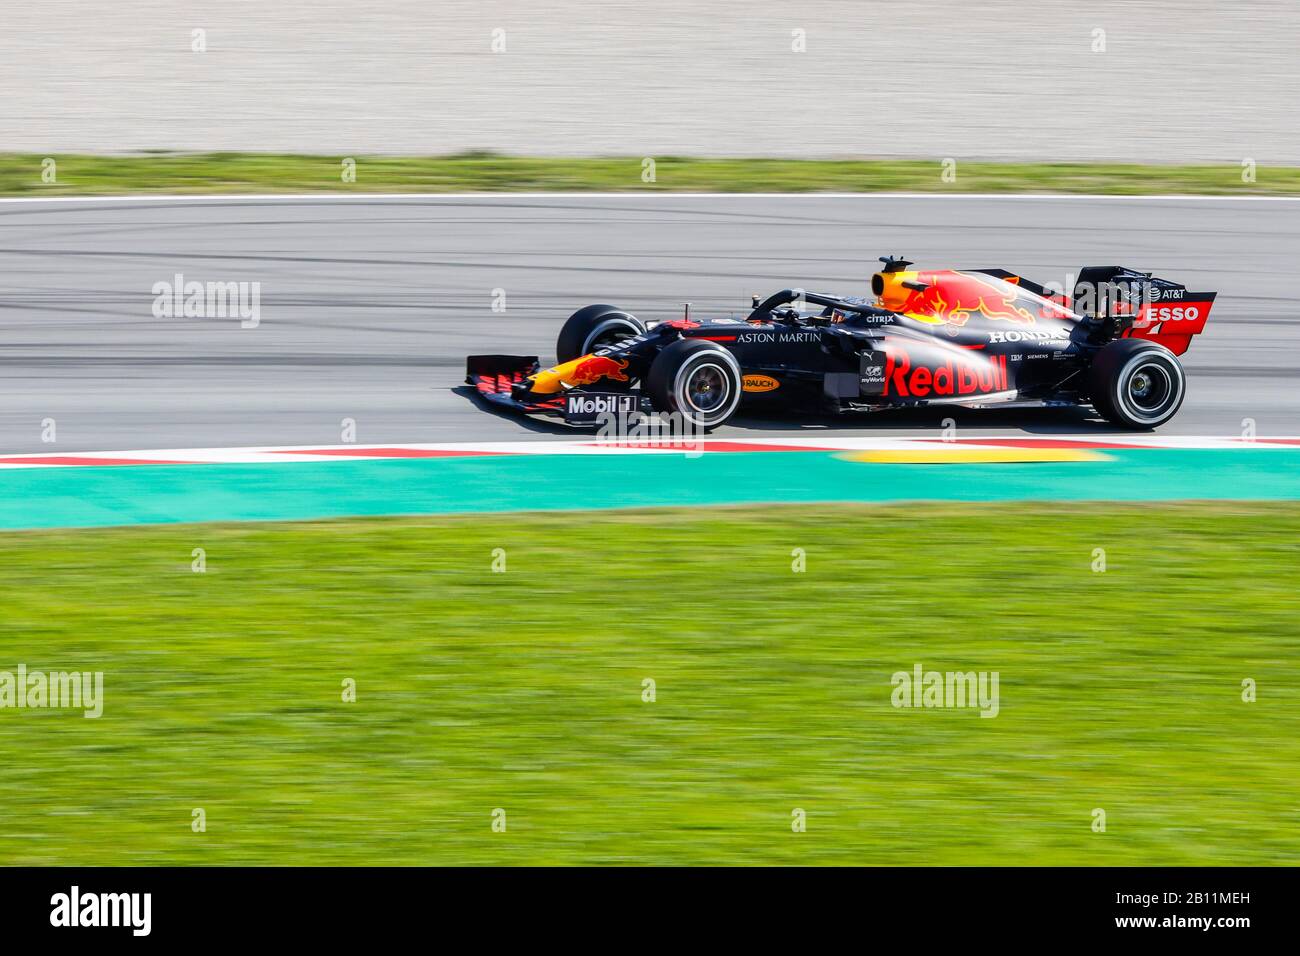 Max Verstappen driving for Red Bull team at F1 Winter Testing at Montmelo circuit, Barcelona, Spain on 21.2.20 Stock Photo